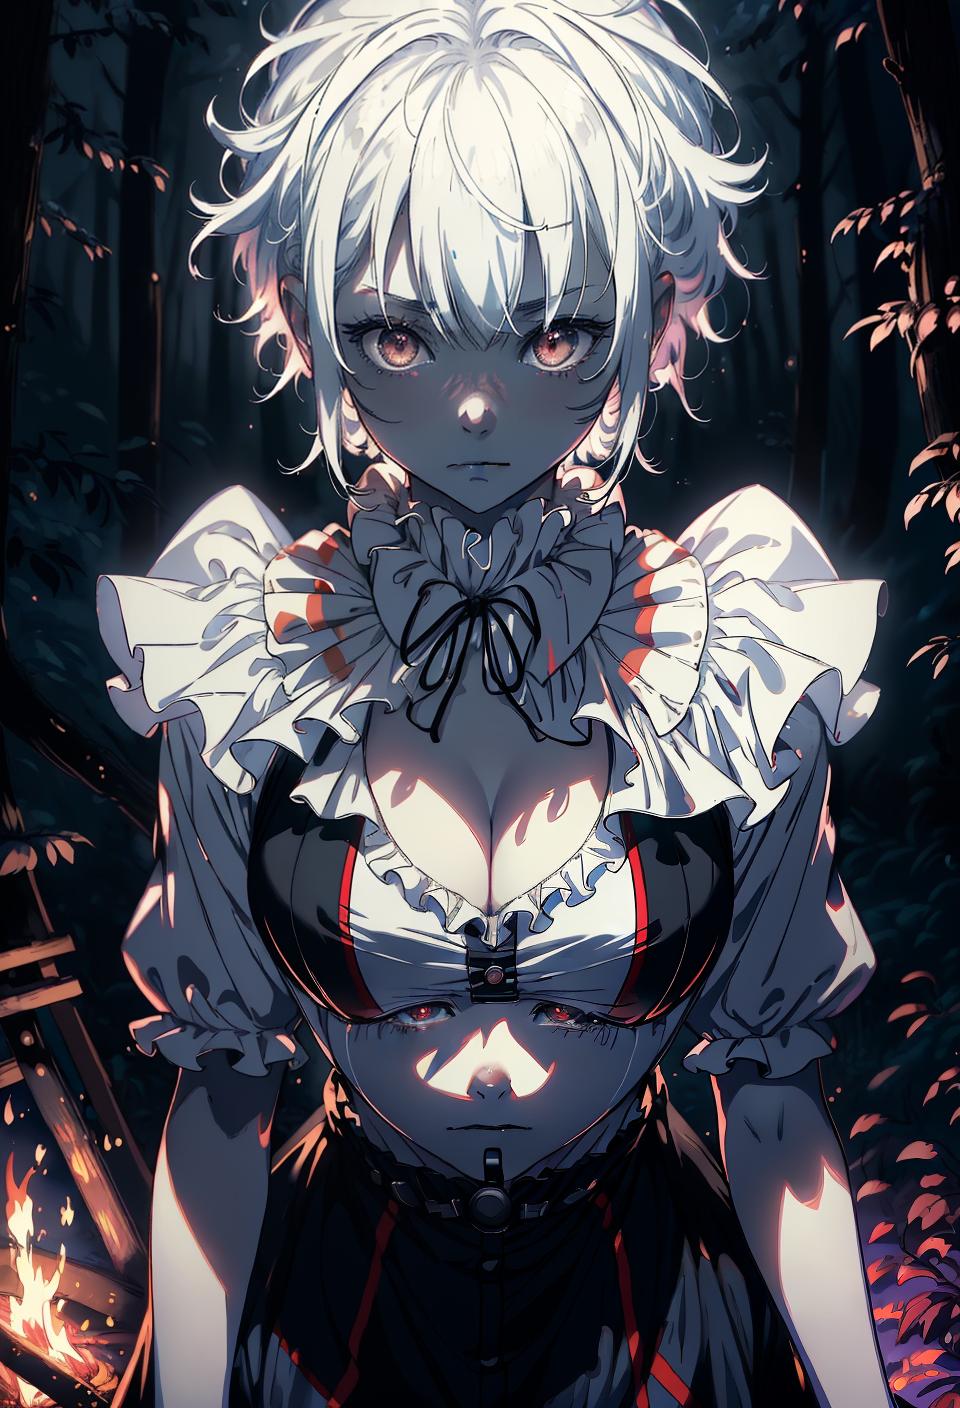  ((trending, highres, masterpiece, cinematic shot)), 1girl, mature, female clown outfit, large, campfire scene, very short spiked white hair, side-swept bangs, narrow grey eyes, gentle personality, worried expression, very pale skin, magical, lucky